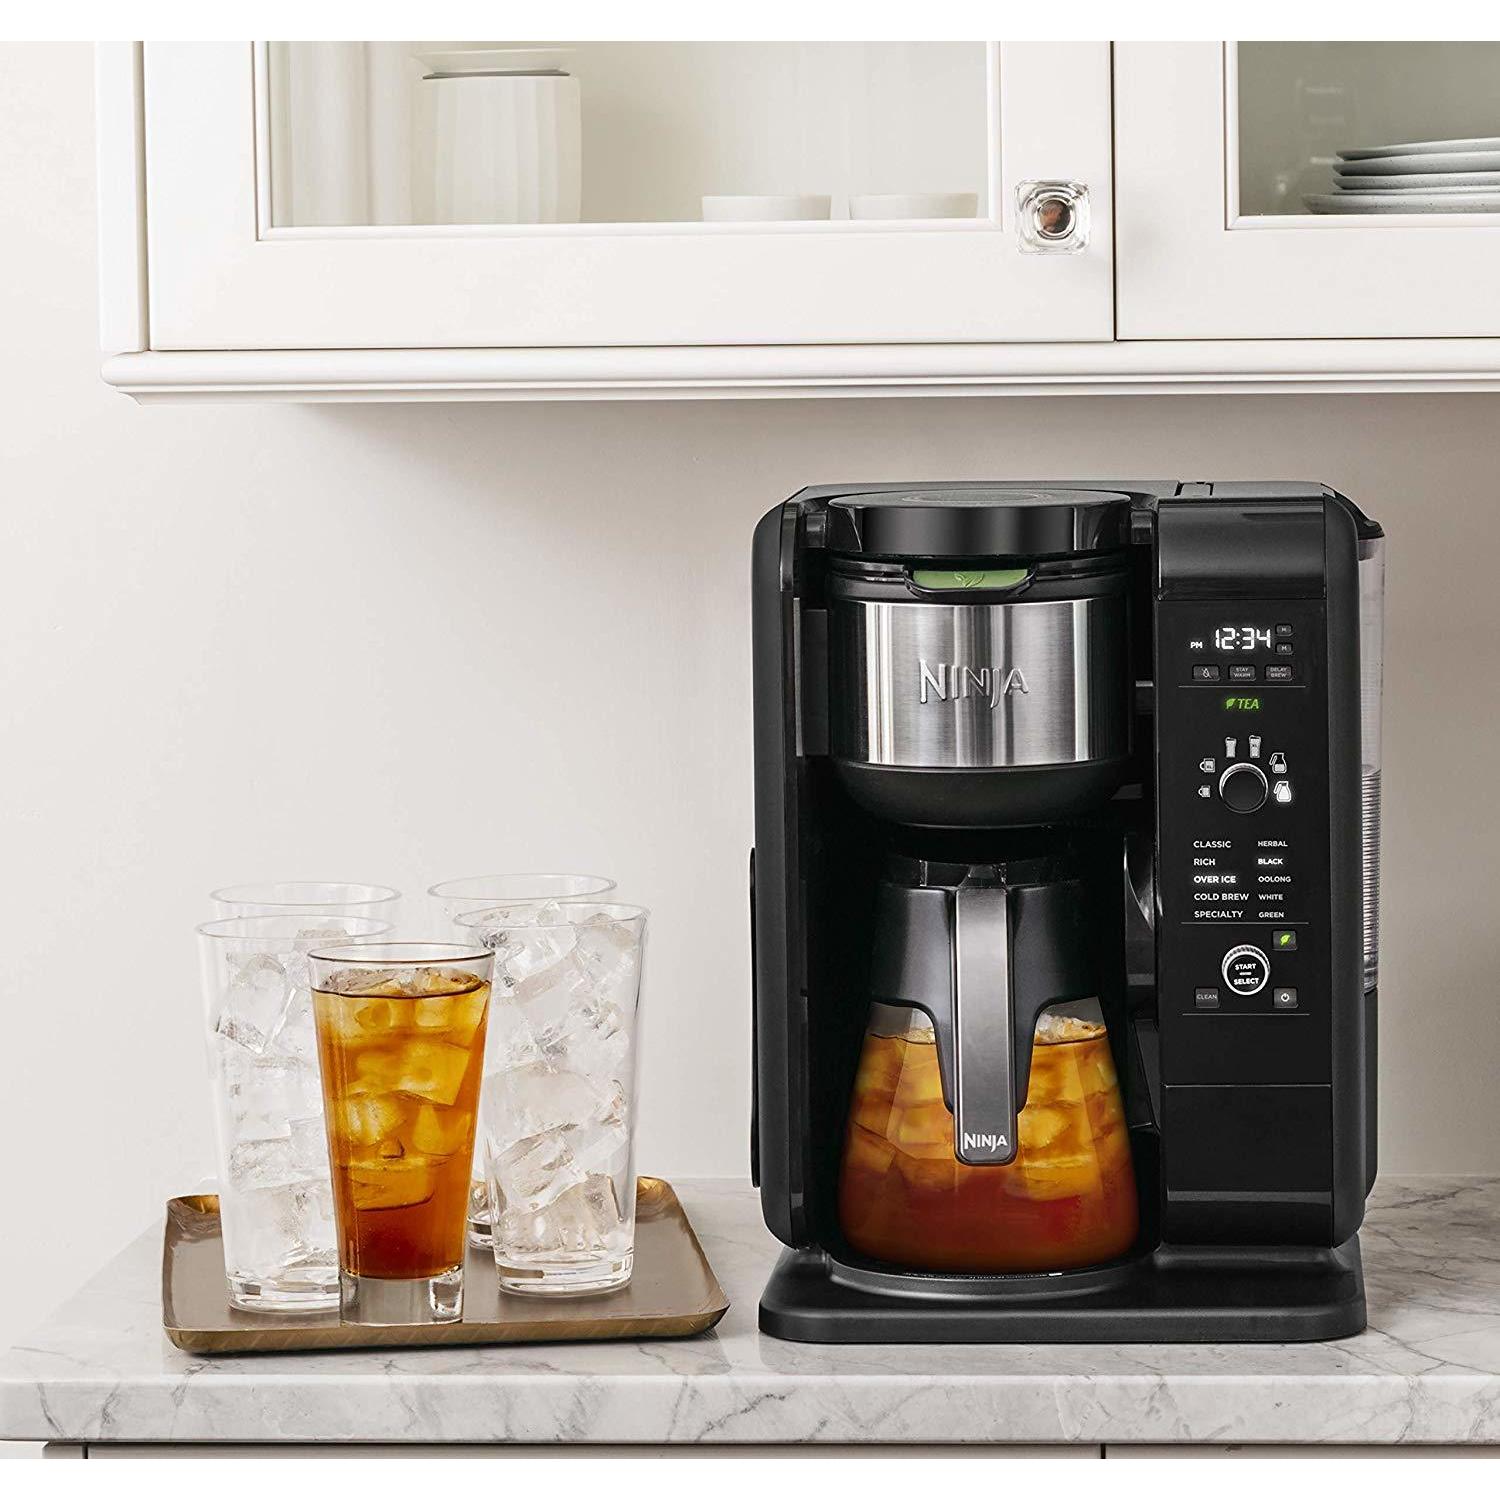 DETAILED REVIEW Ninja CP301 Hot & Cold Coffee Maker Brewed System How to  Use CP301 